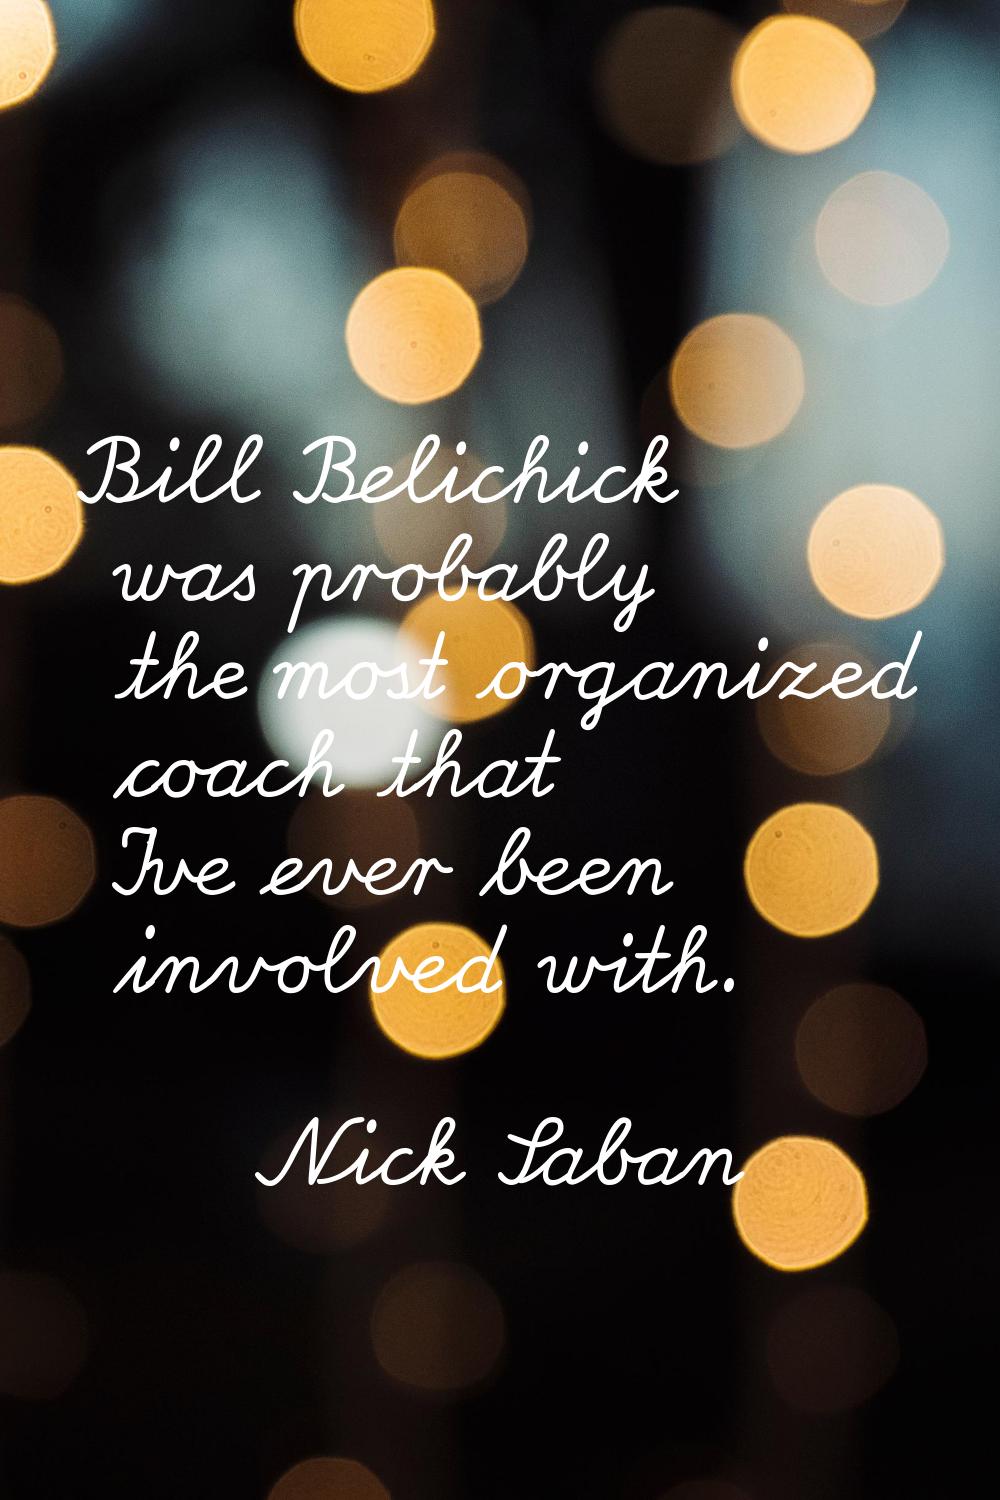 Bill Belichick was probably the most organized coach that I've ever been involved with.